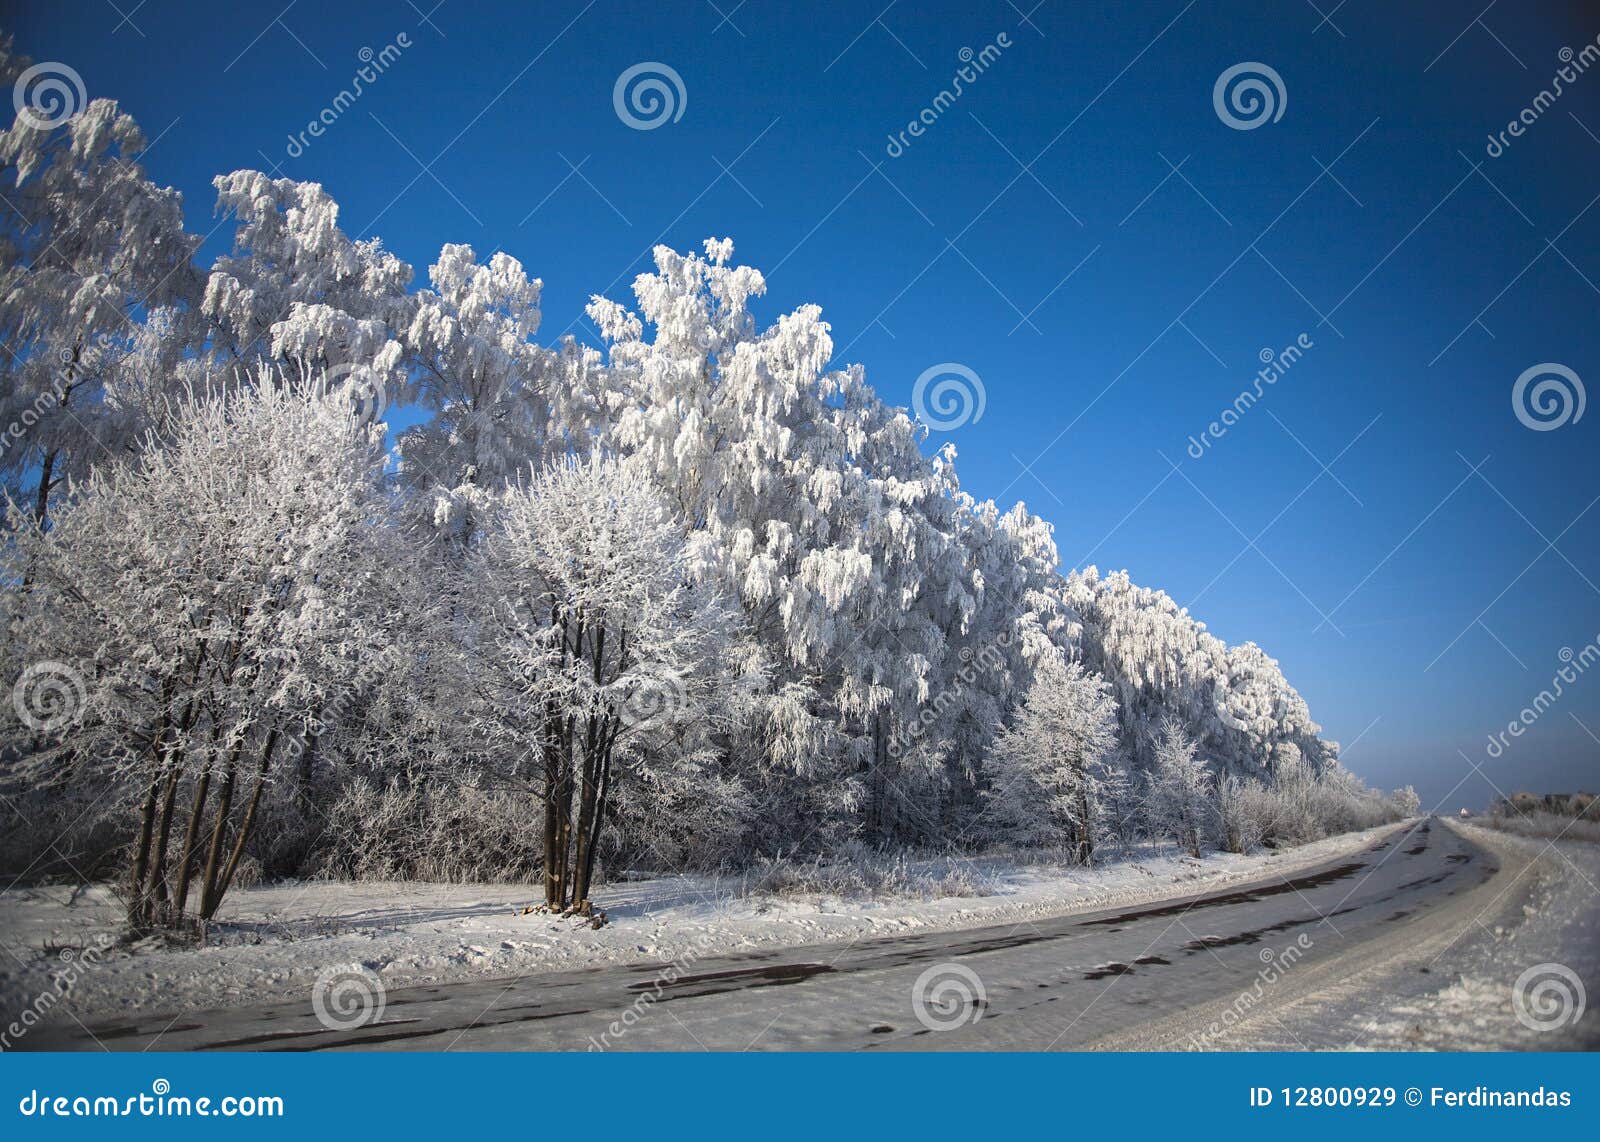 winter road with frosted trees and rime